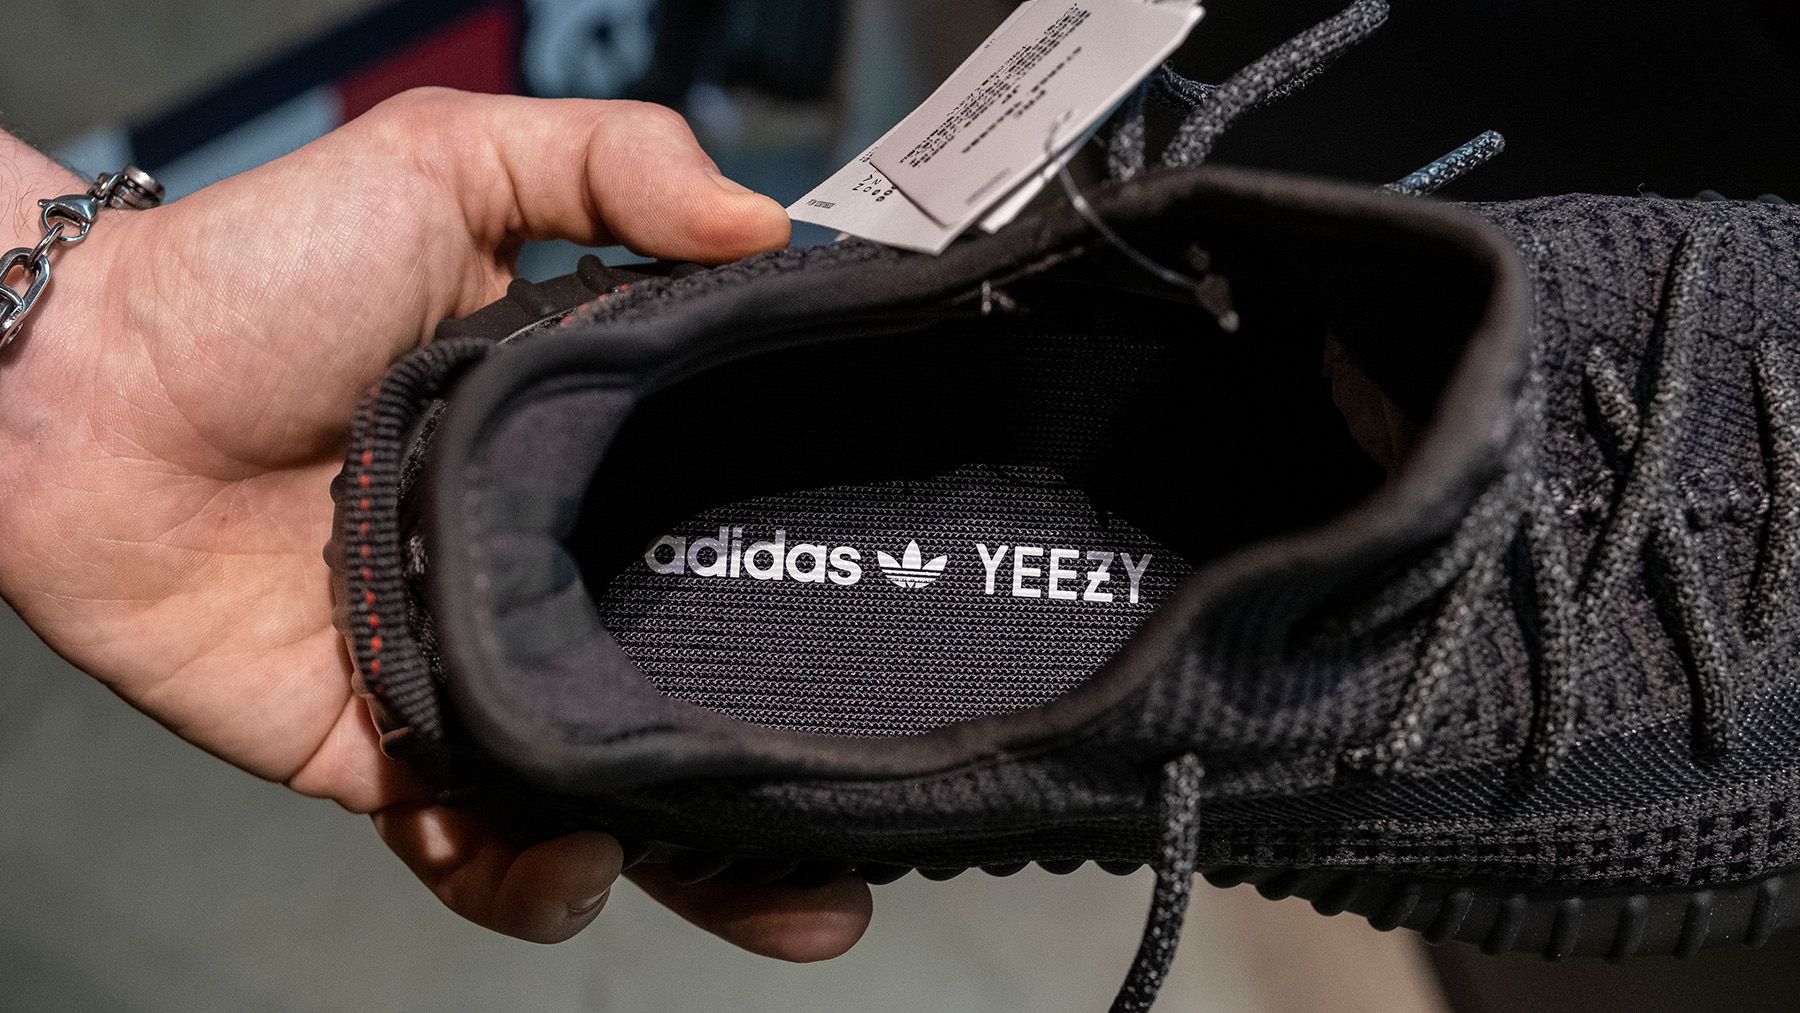 Adidas Plans Sale of Second Yeezy Batch to Eat Into Stockpile